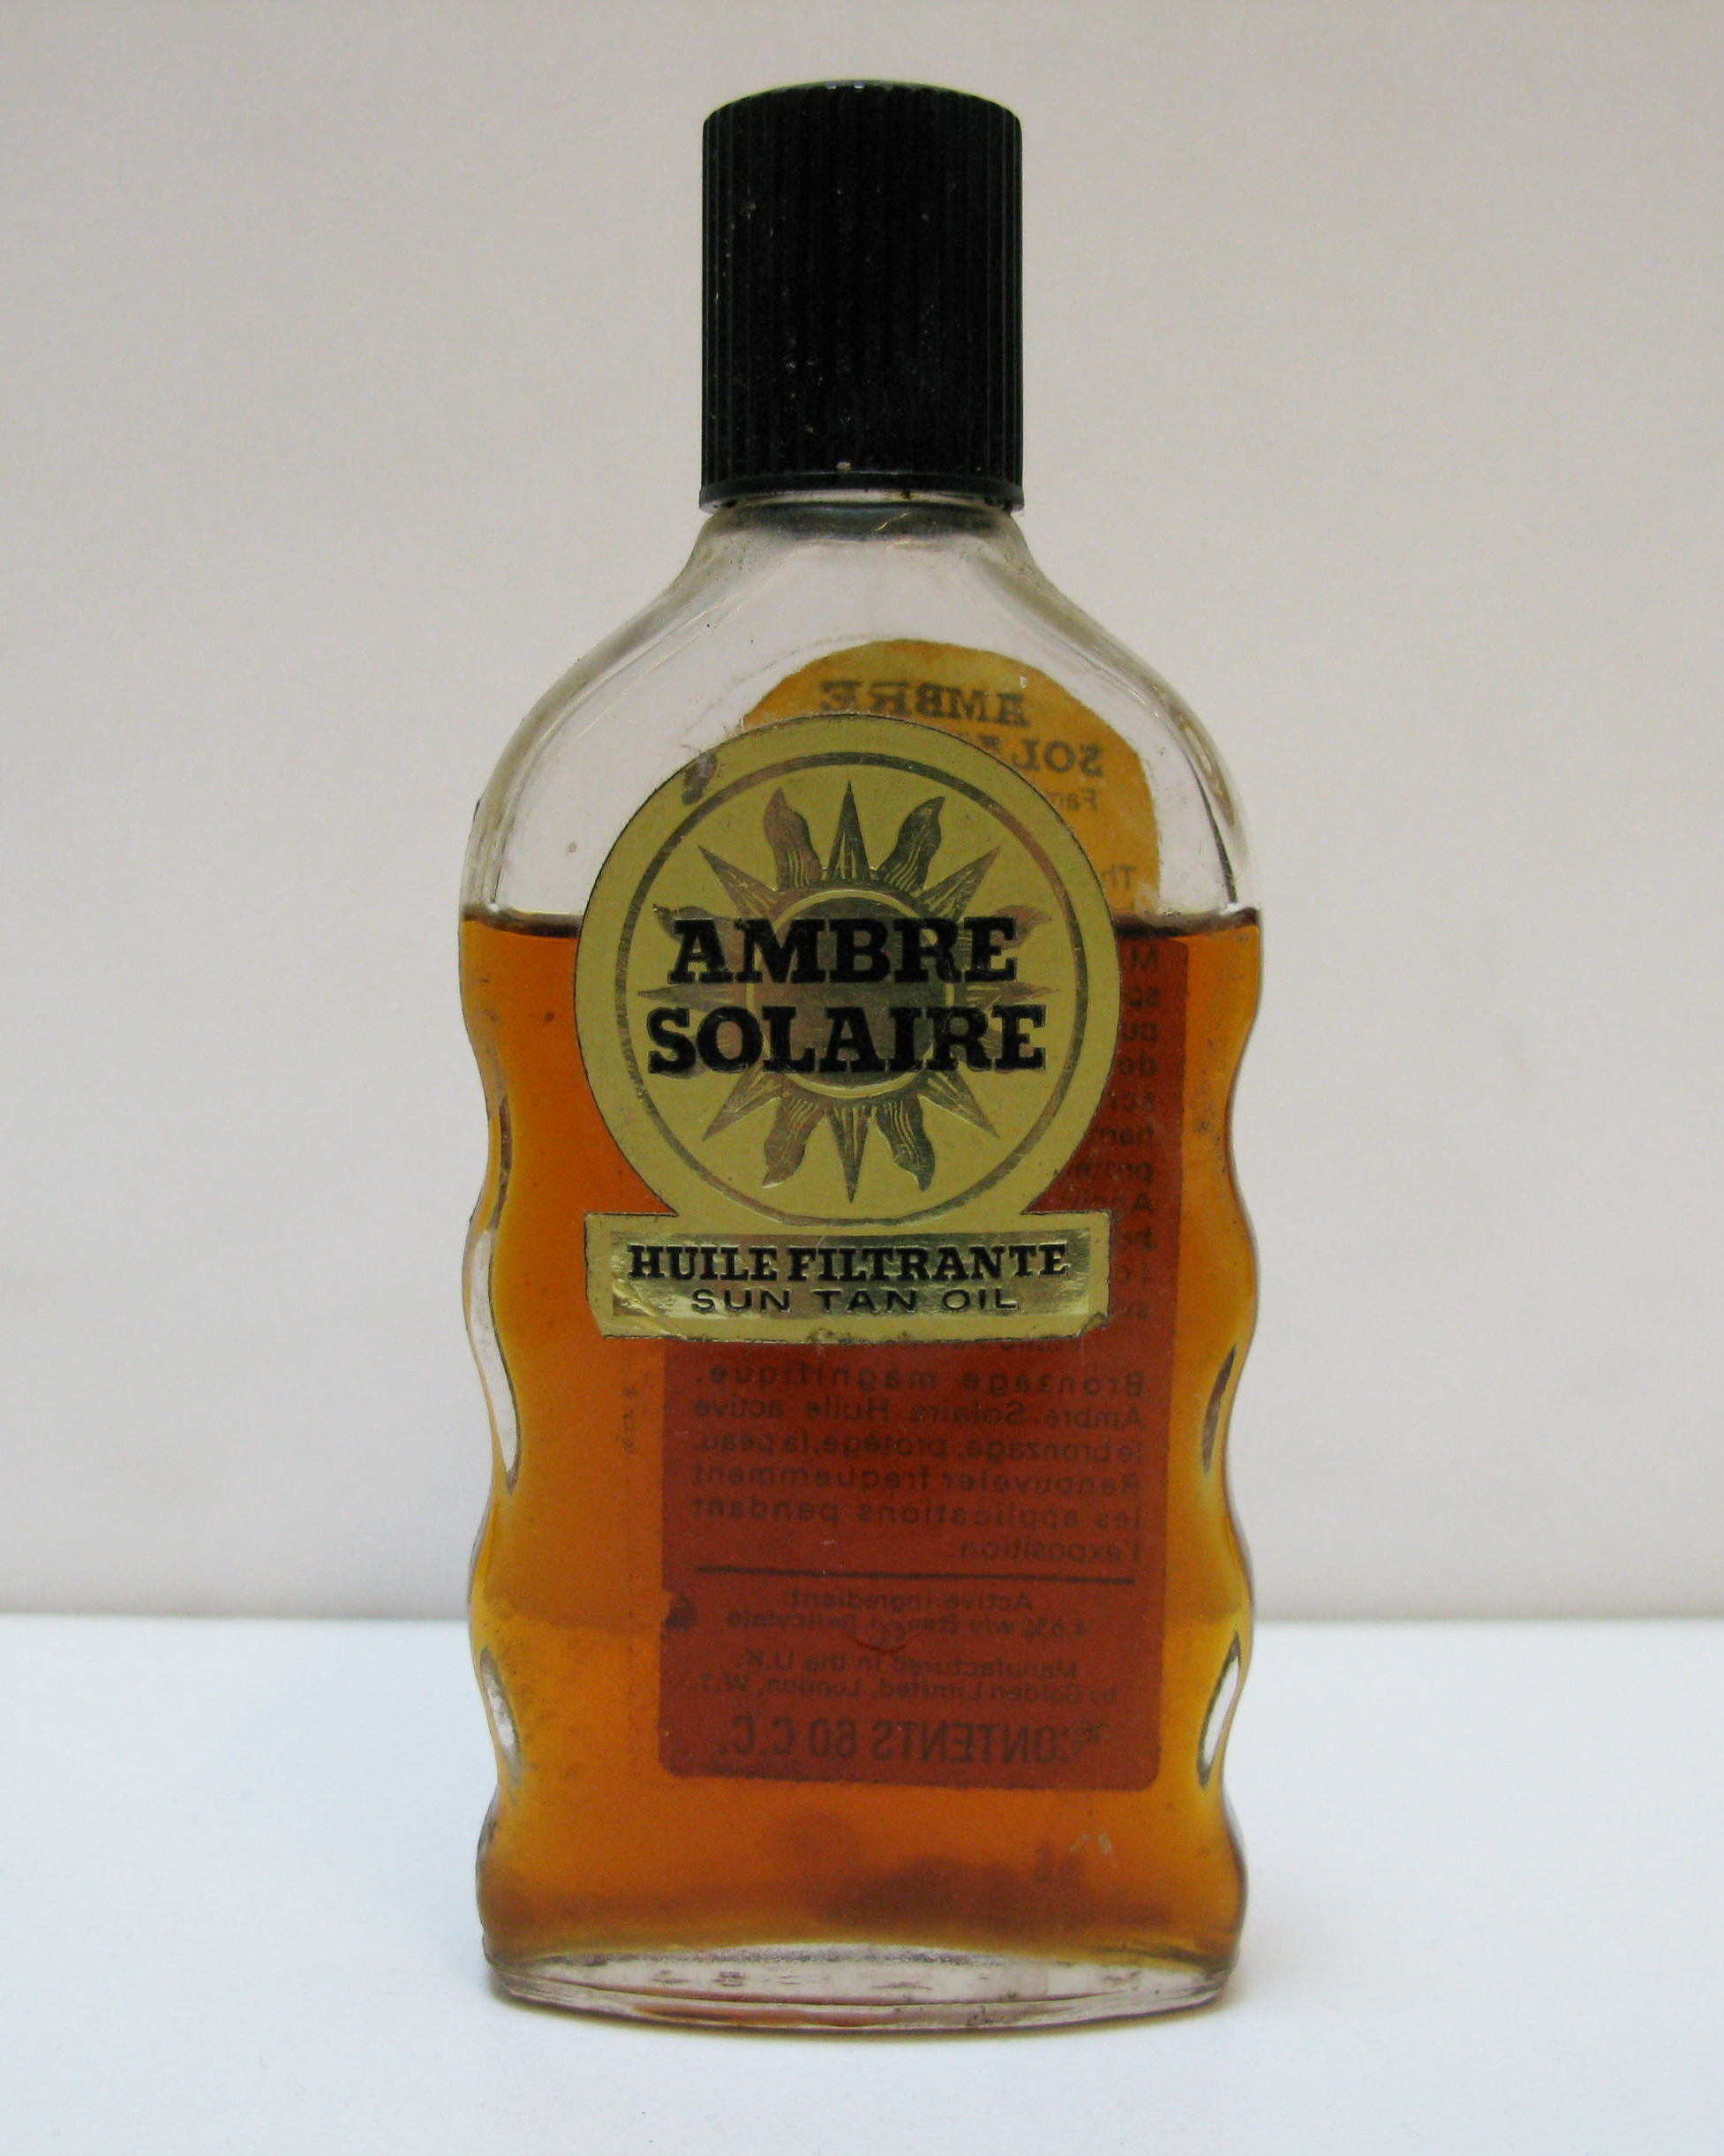 Bottle of Ambre Solaire, c. 1960, on loan Royal Pharmaceutical Society of Great Britain